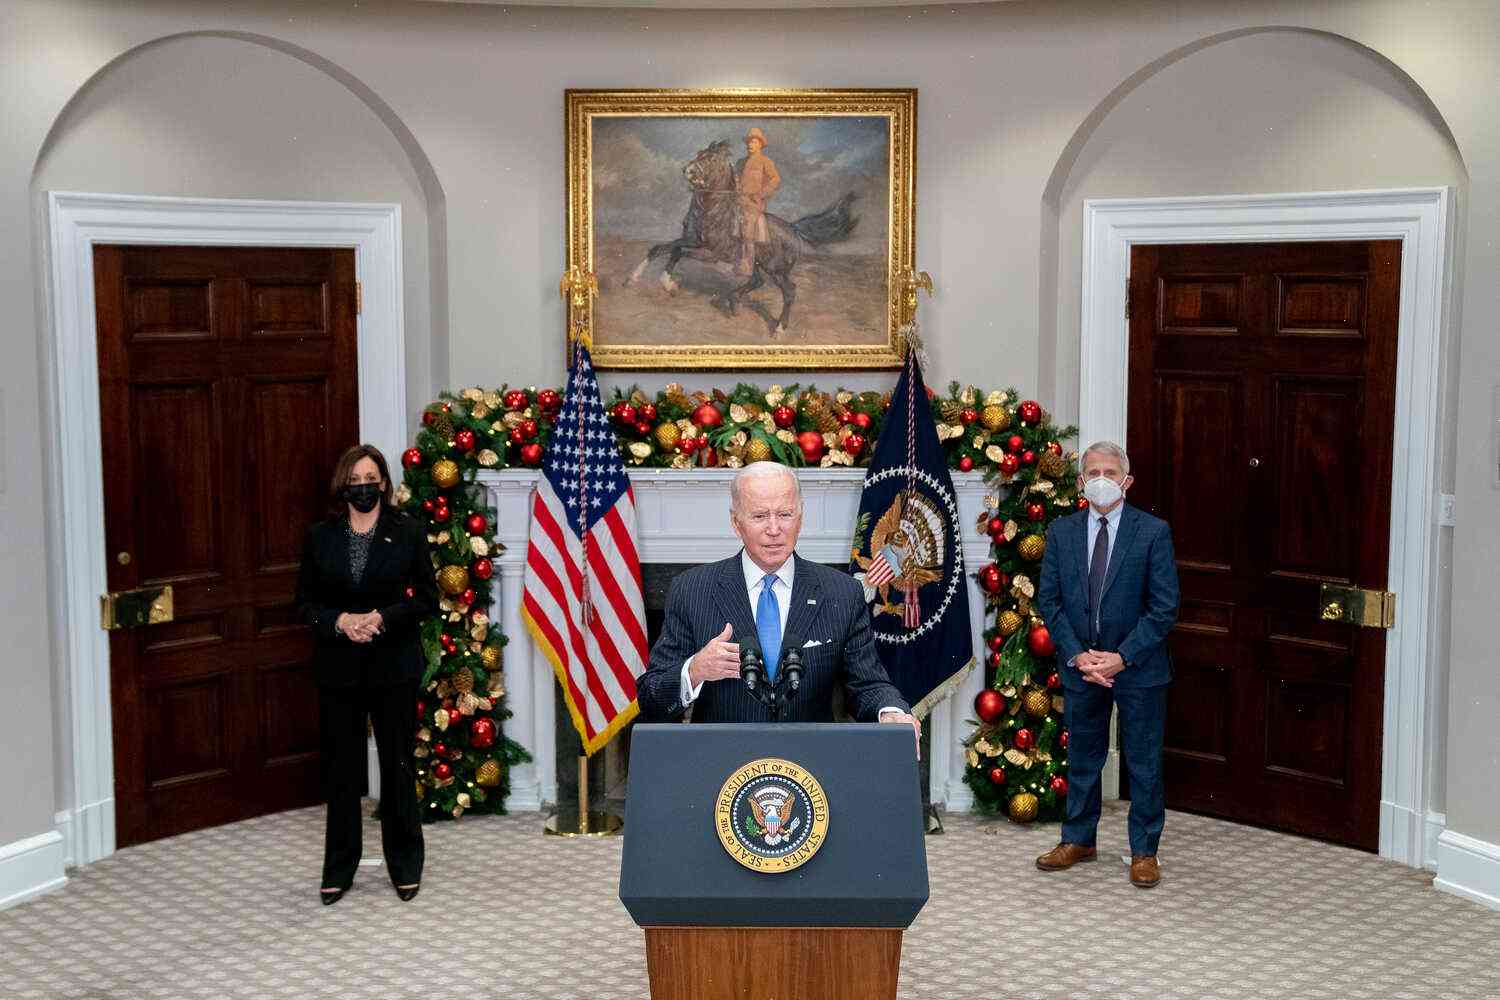 Biden shares embarrassing government shutdown tale in Oval Office meeting with Trump